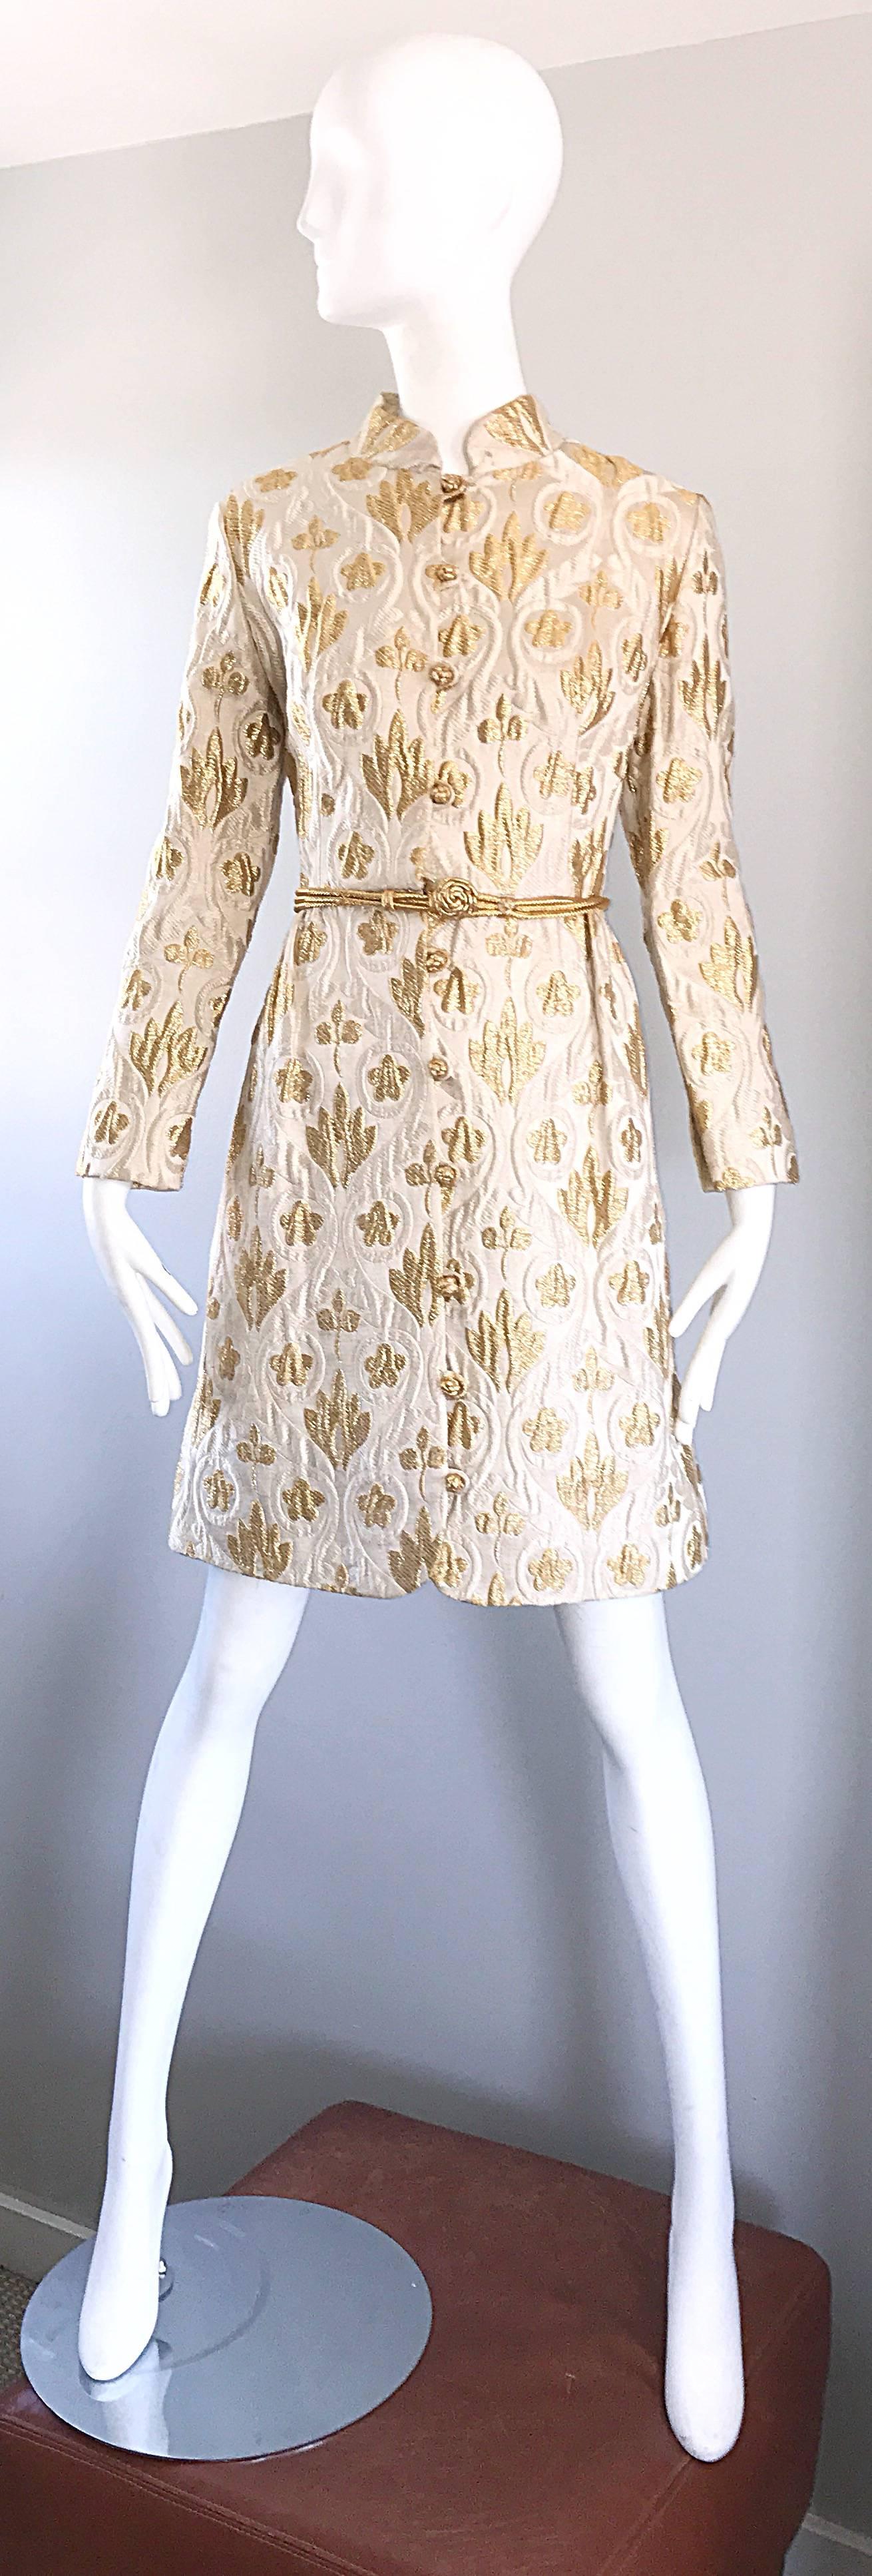 Chic 1960s VICTOR COSTA Romantica for Lord and Taylor gold and ivory metallic silk brocade long sleeve dress! Features a detachable gold cord belt, with 10 gold embroidered buttons up the front, with hook-and-eye closure at the waist. Pocket at each